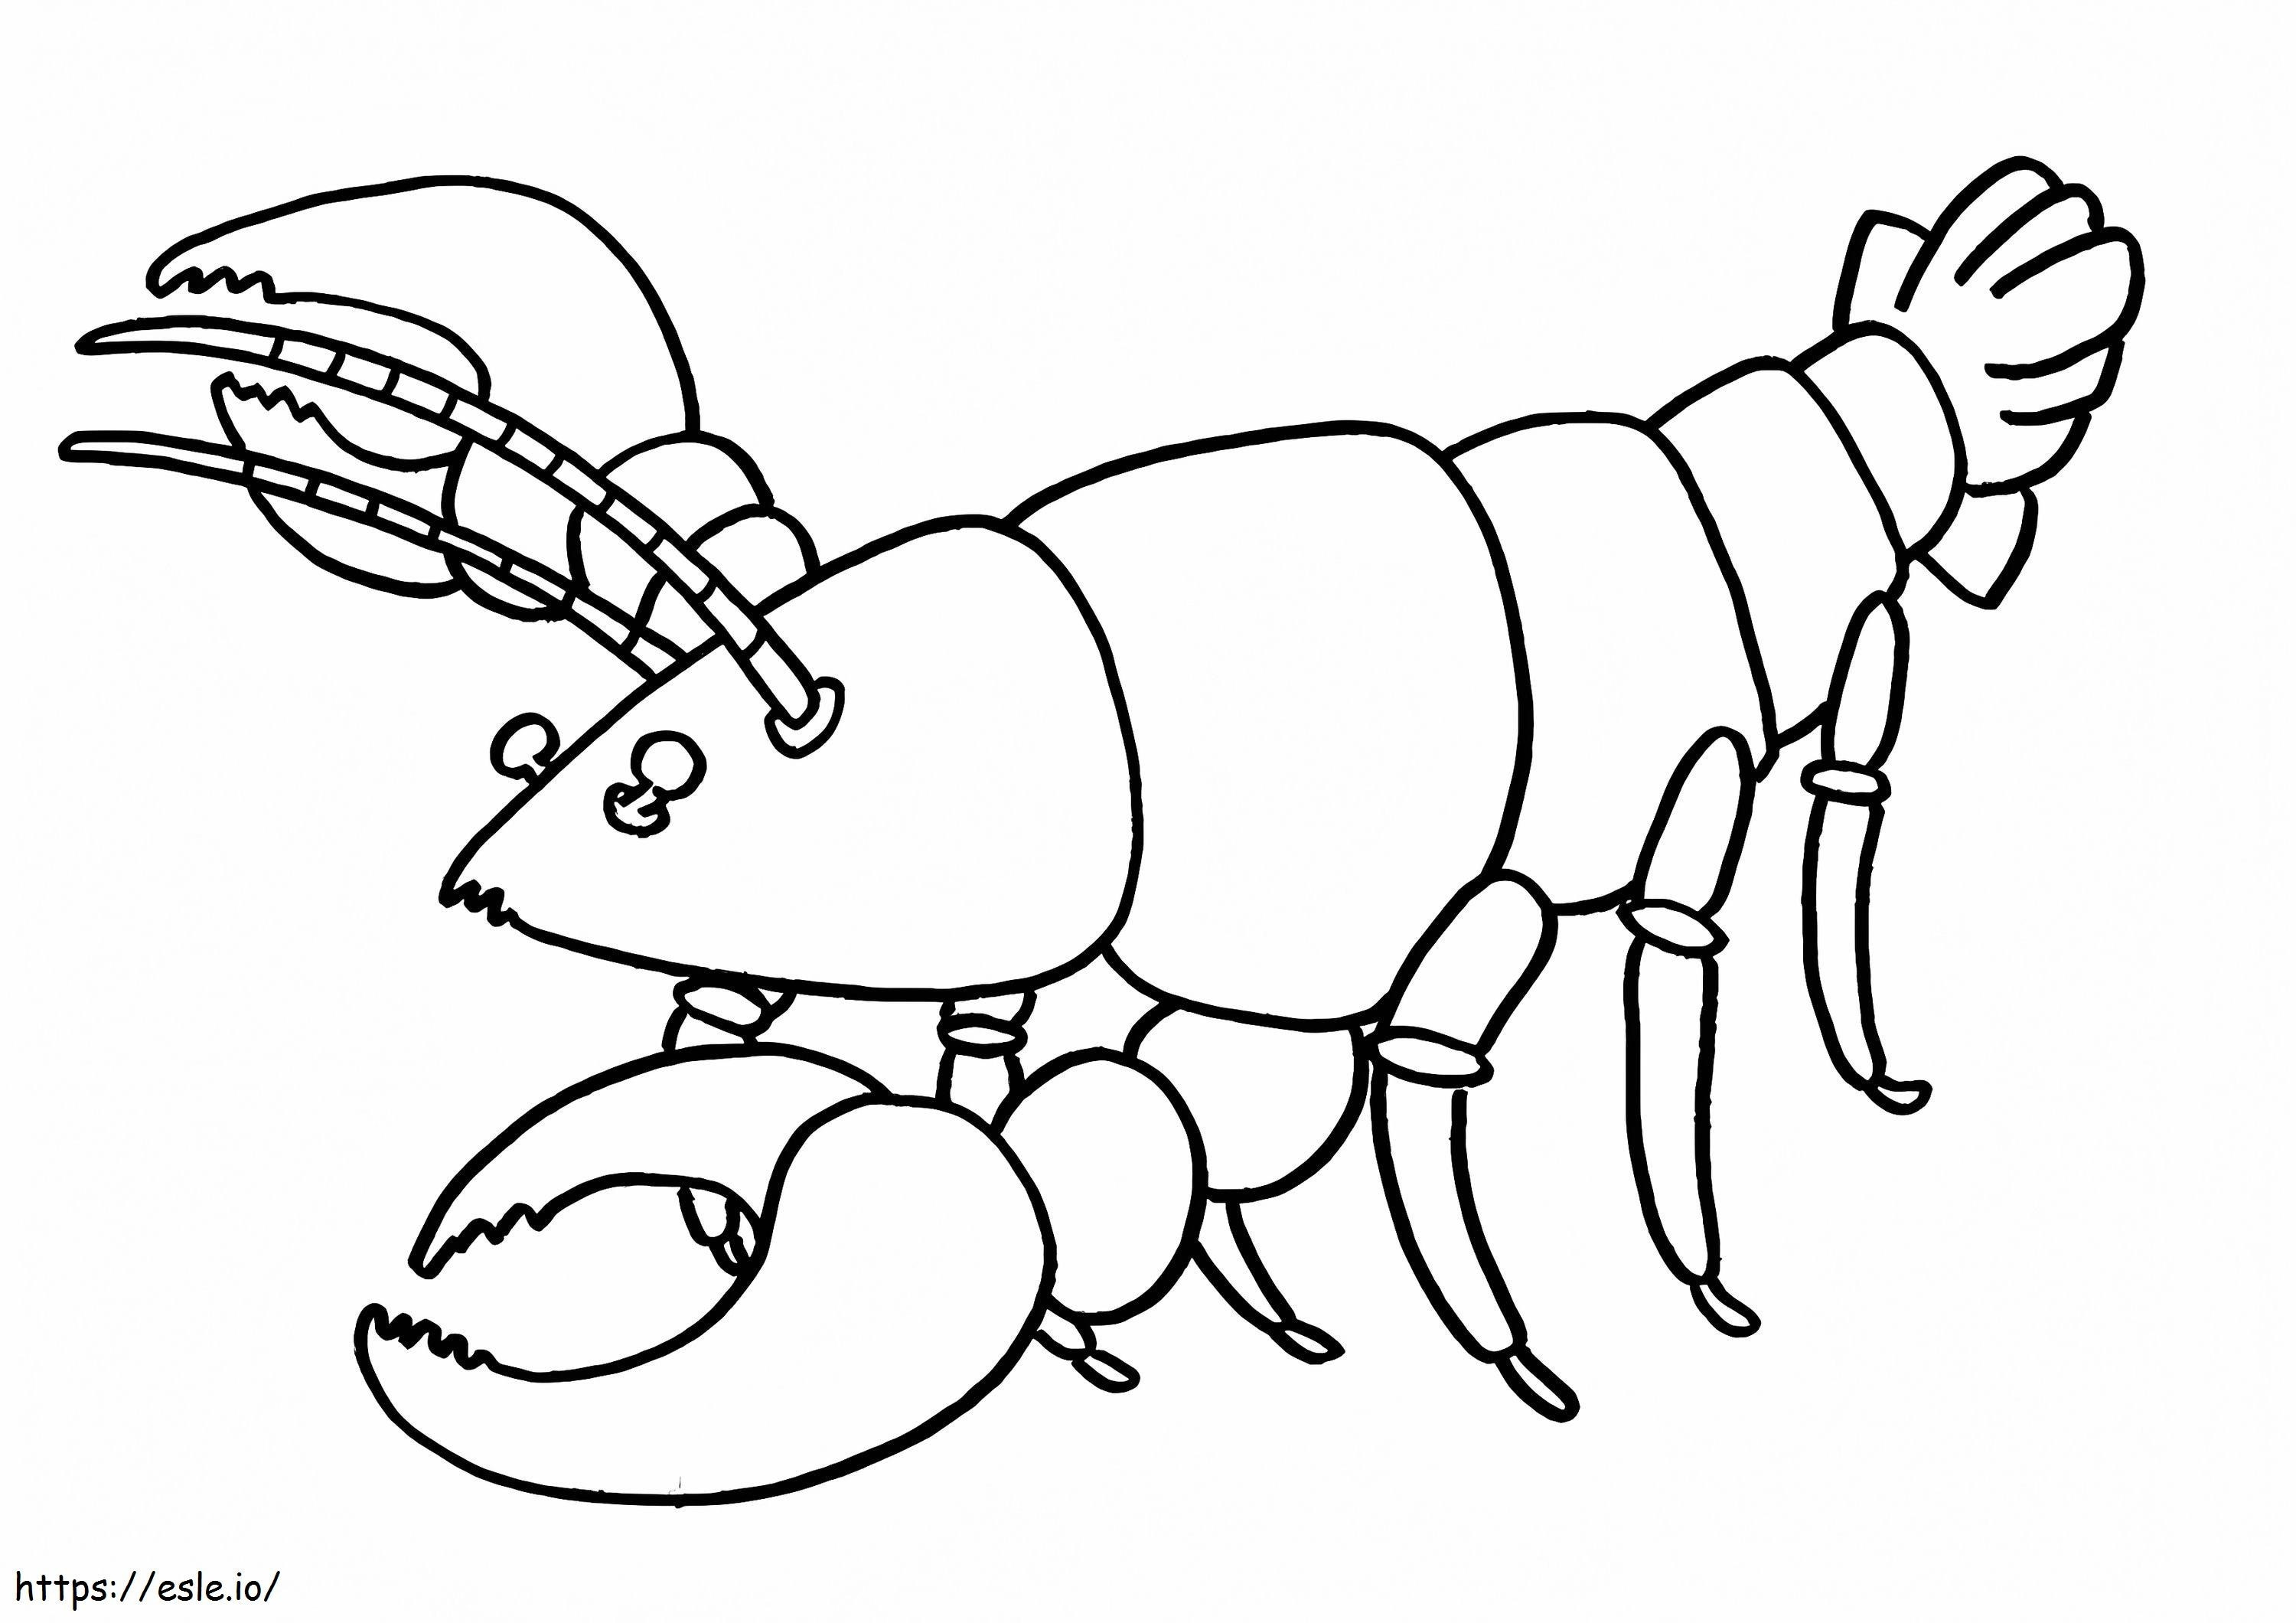 1526462405 Larry The Lobster A4 E1600823257281 coloring page